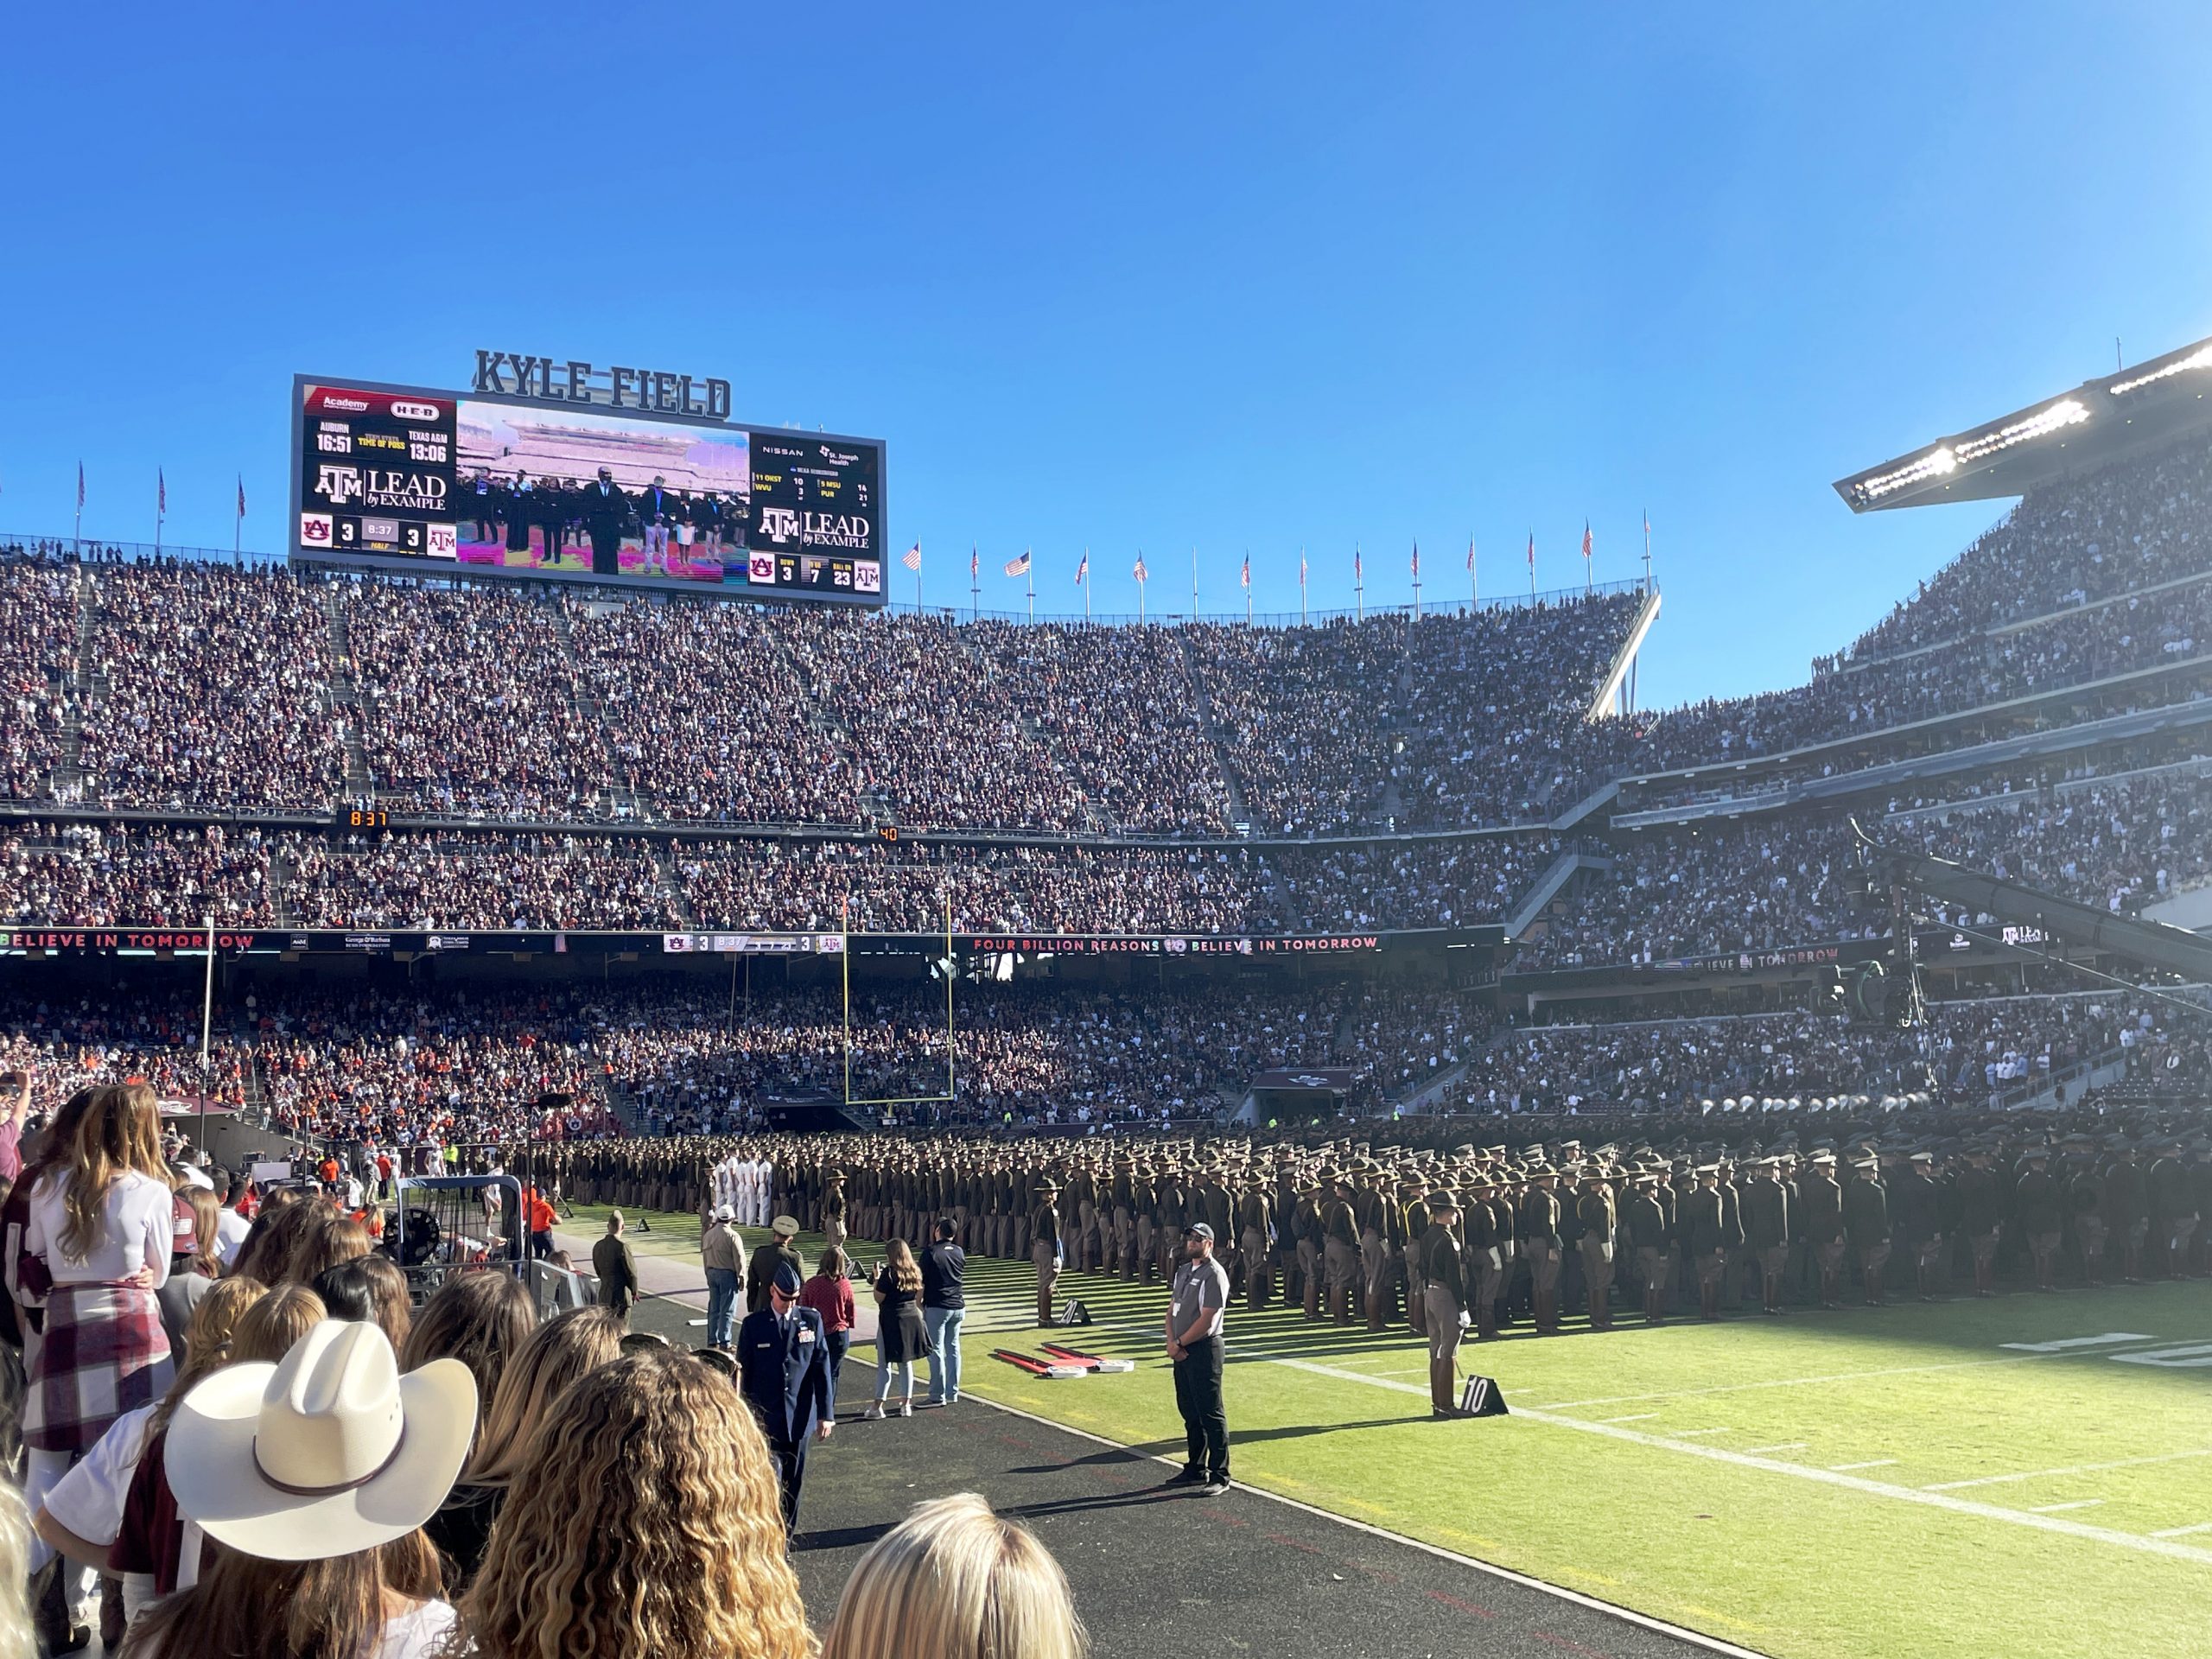 The band waits to perform on Kyle Field.